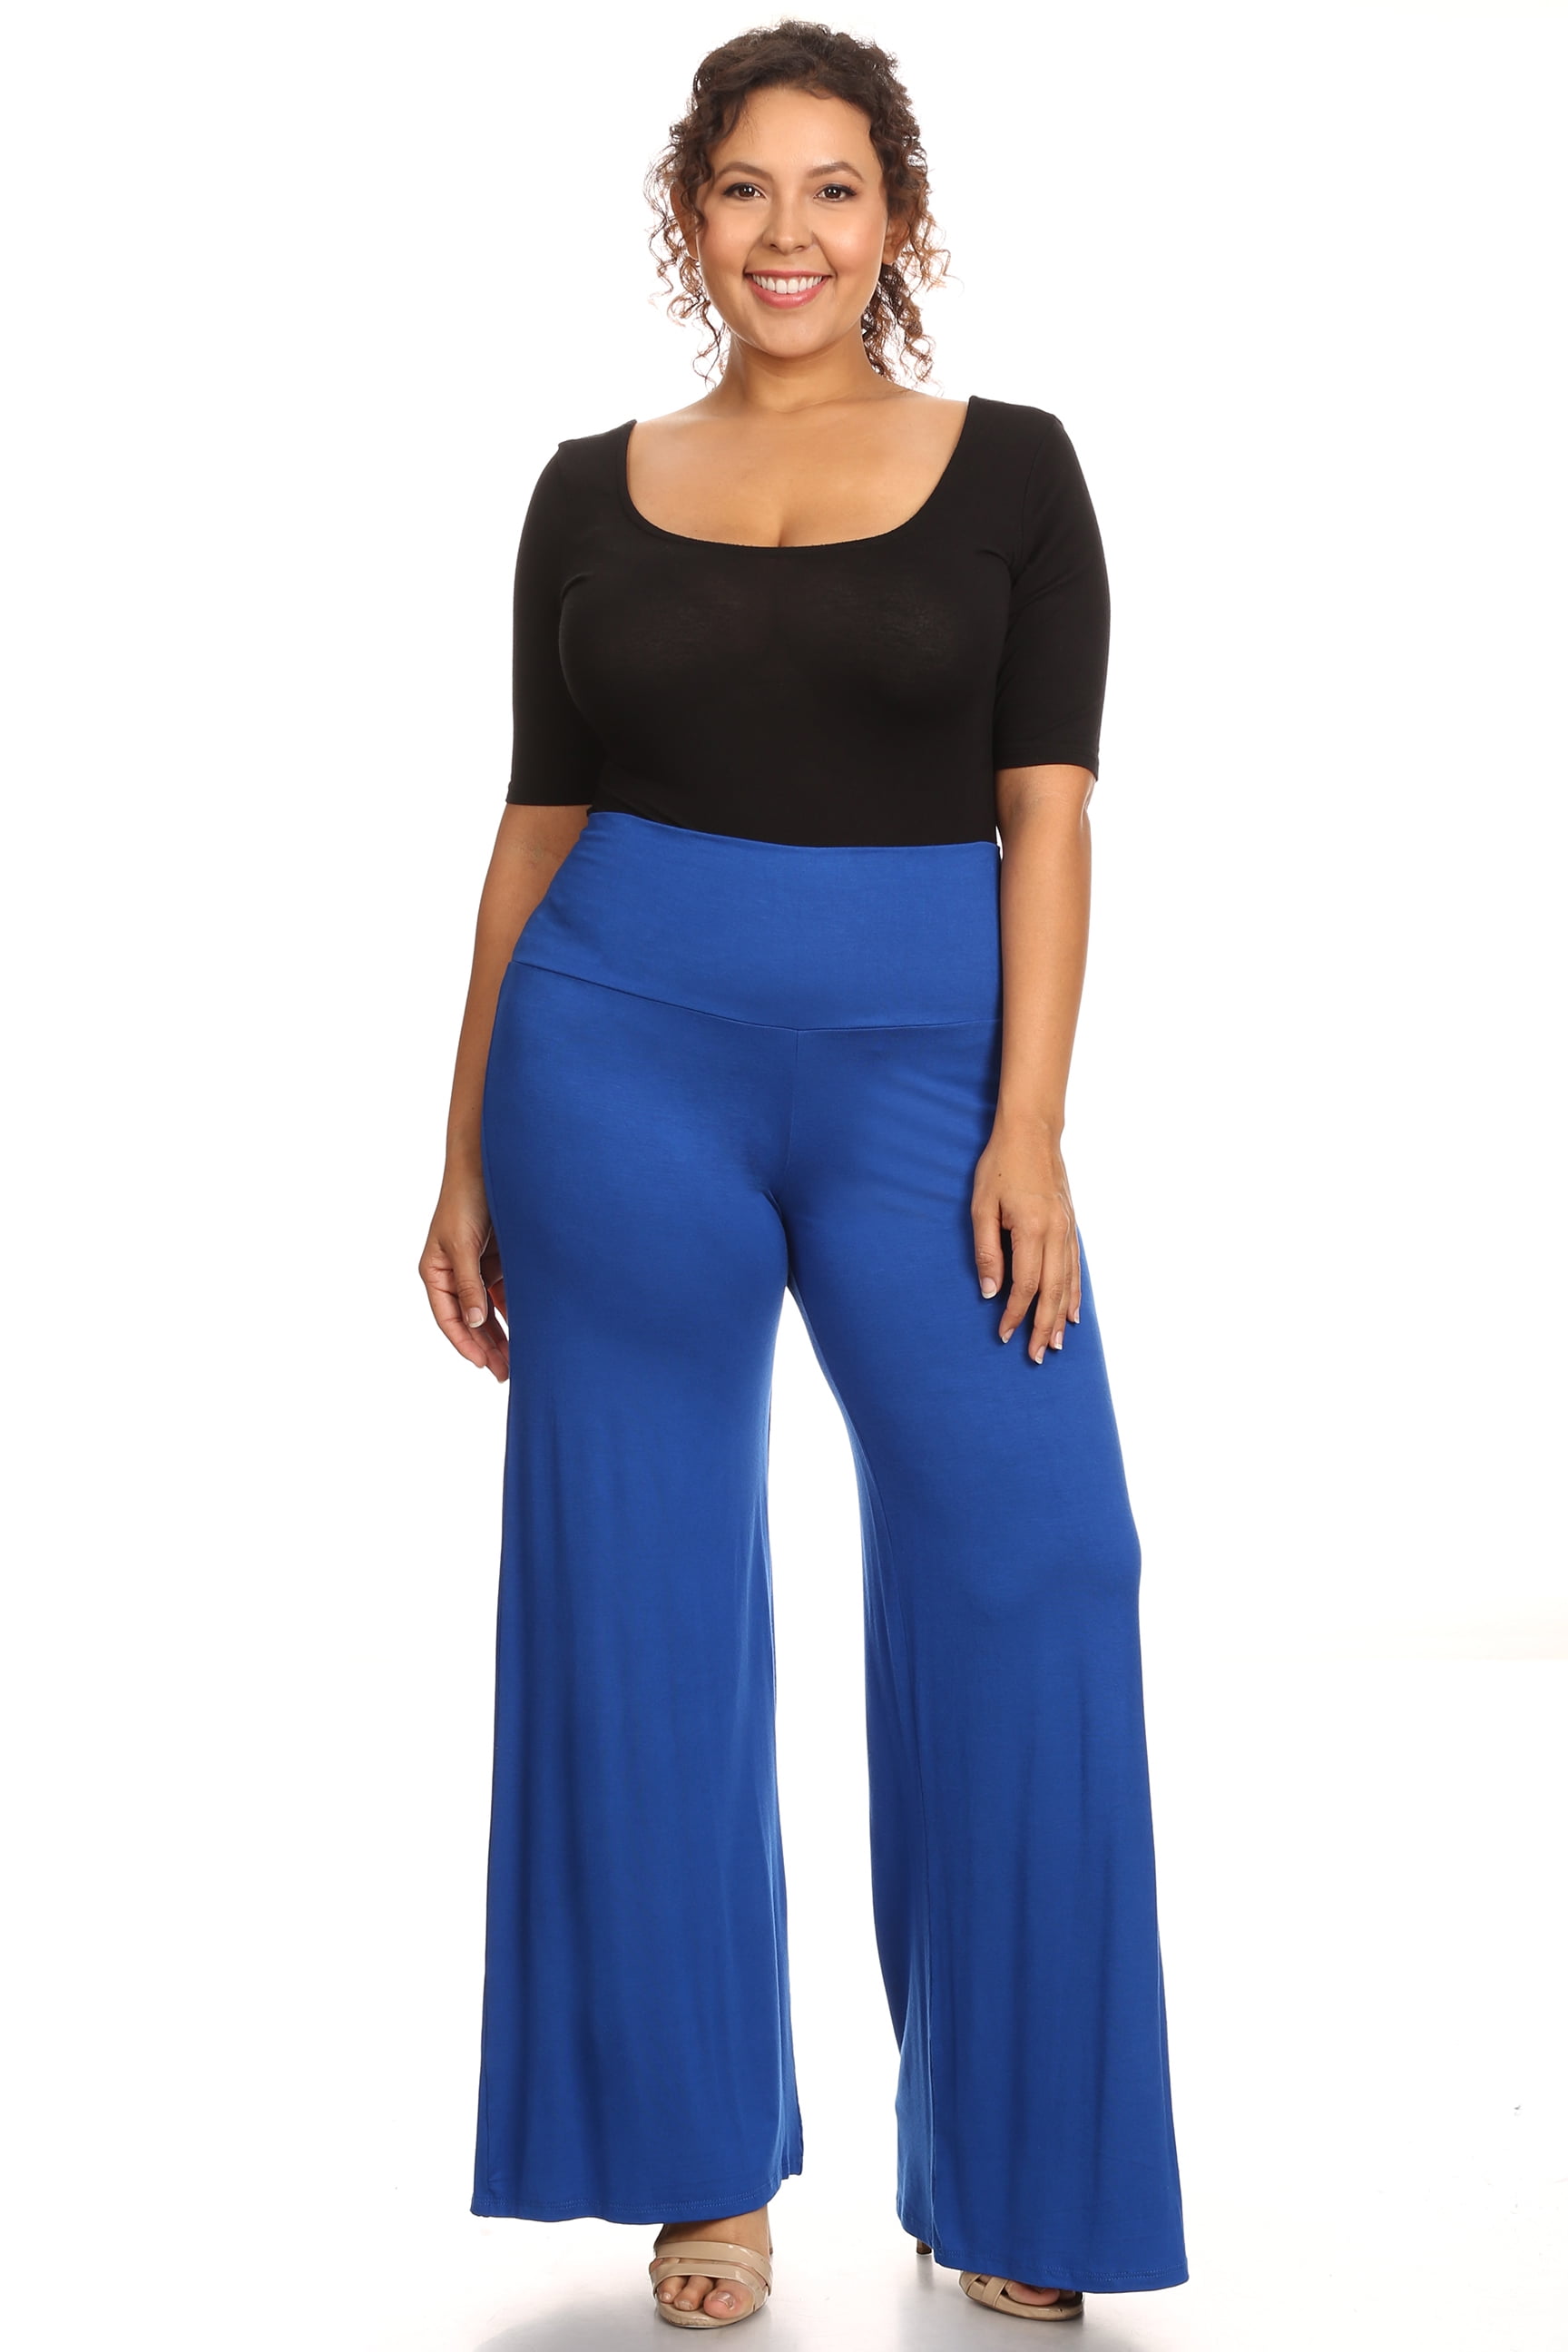 Shore Trendz - Plus Size Women's Palazzo Pants Hight Waisted Made in ...